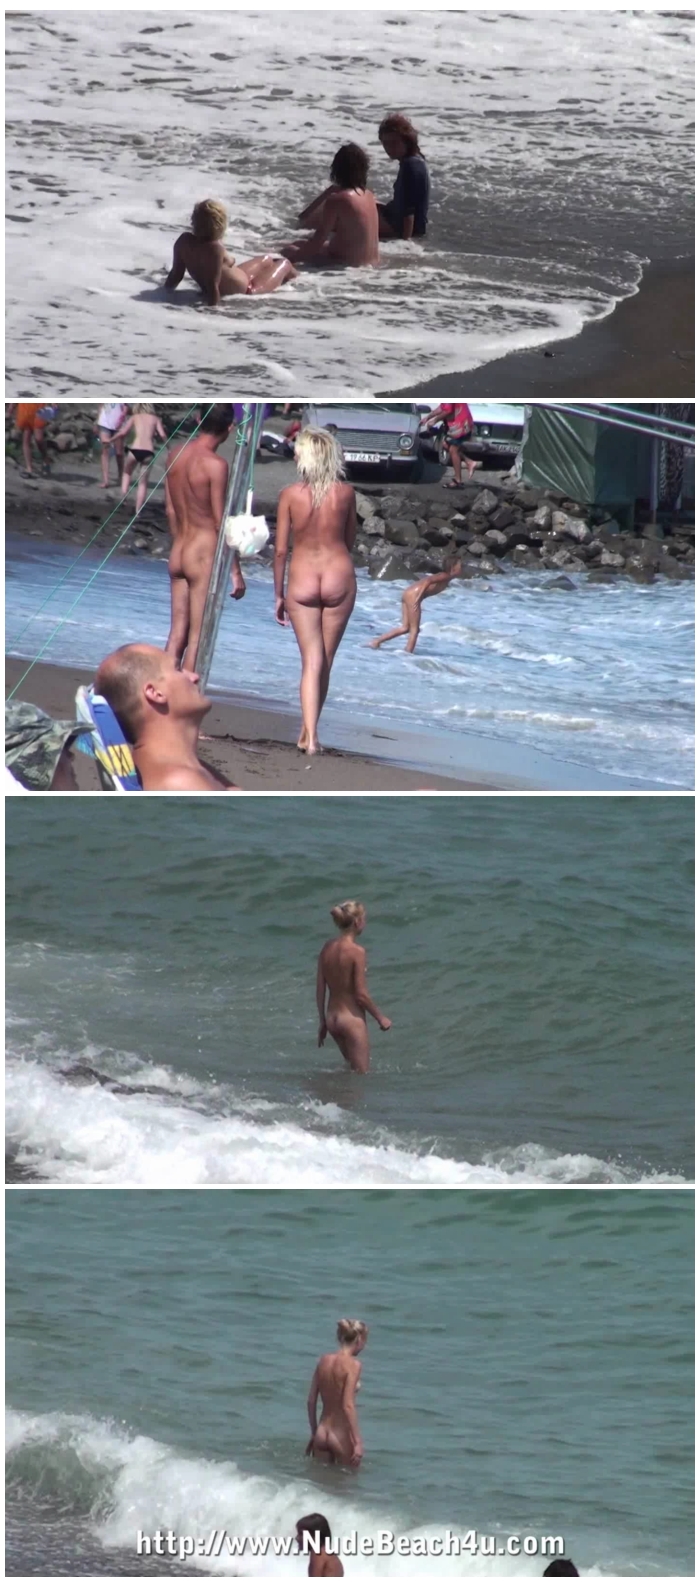 Nude Beach for You - voyeur adult Page 62 Sex-Forum pic